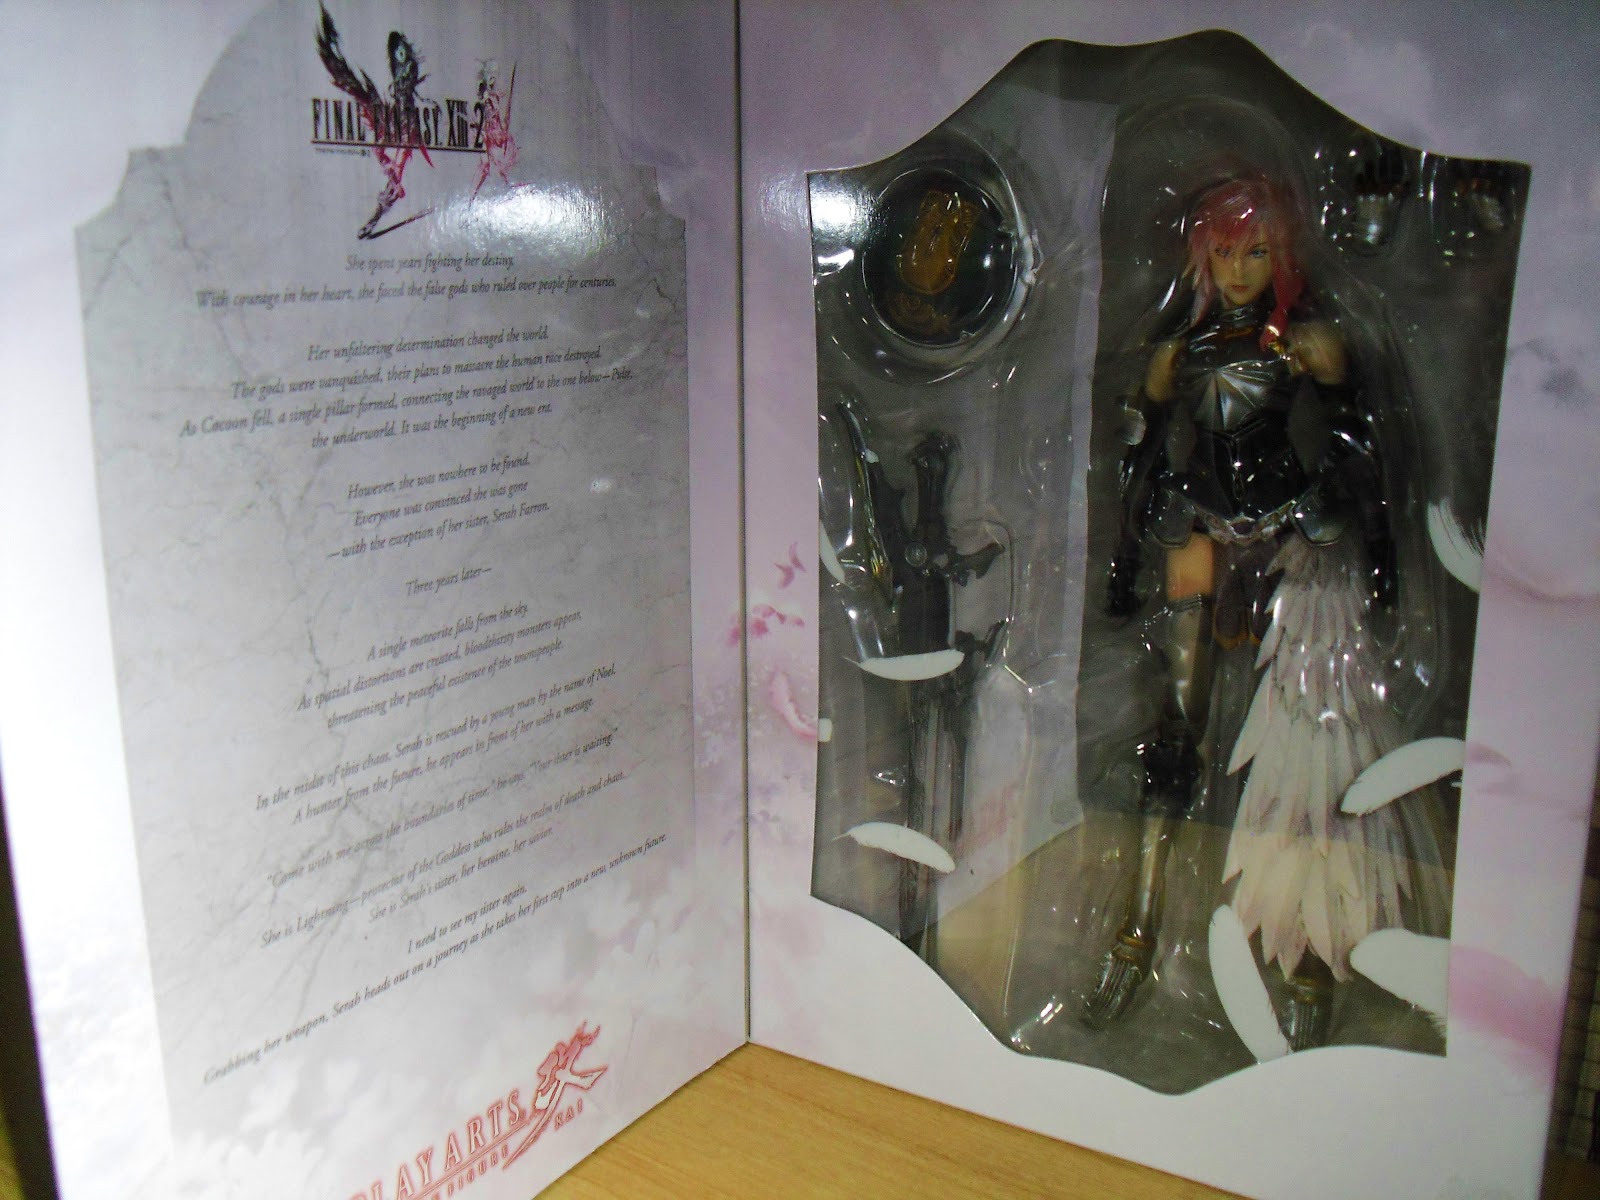 Article] Lightning Strikes! Final Fantasy XIII Character is New